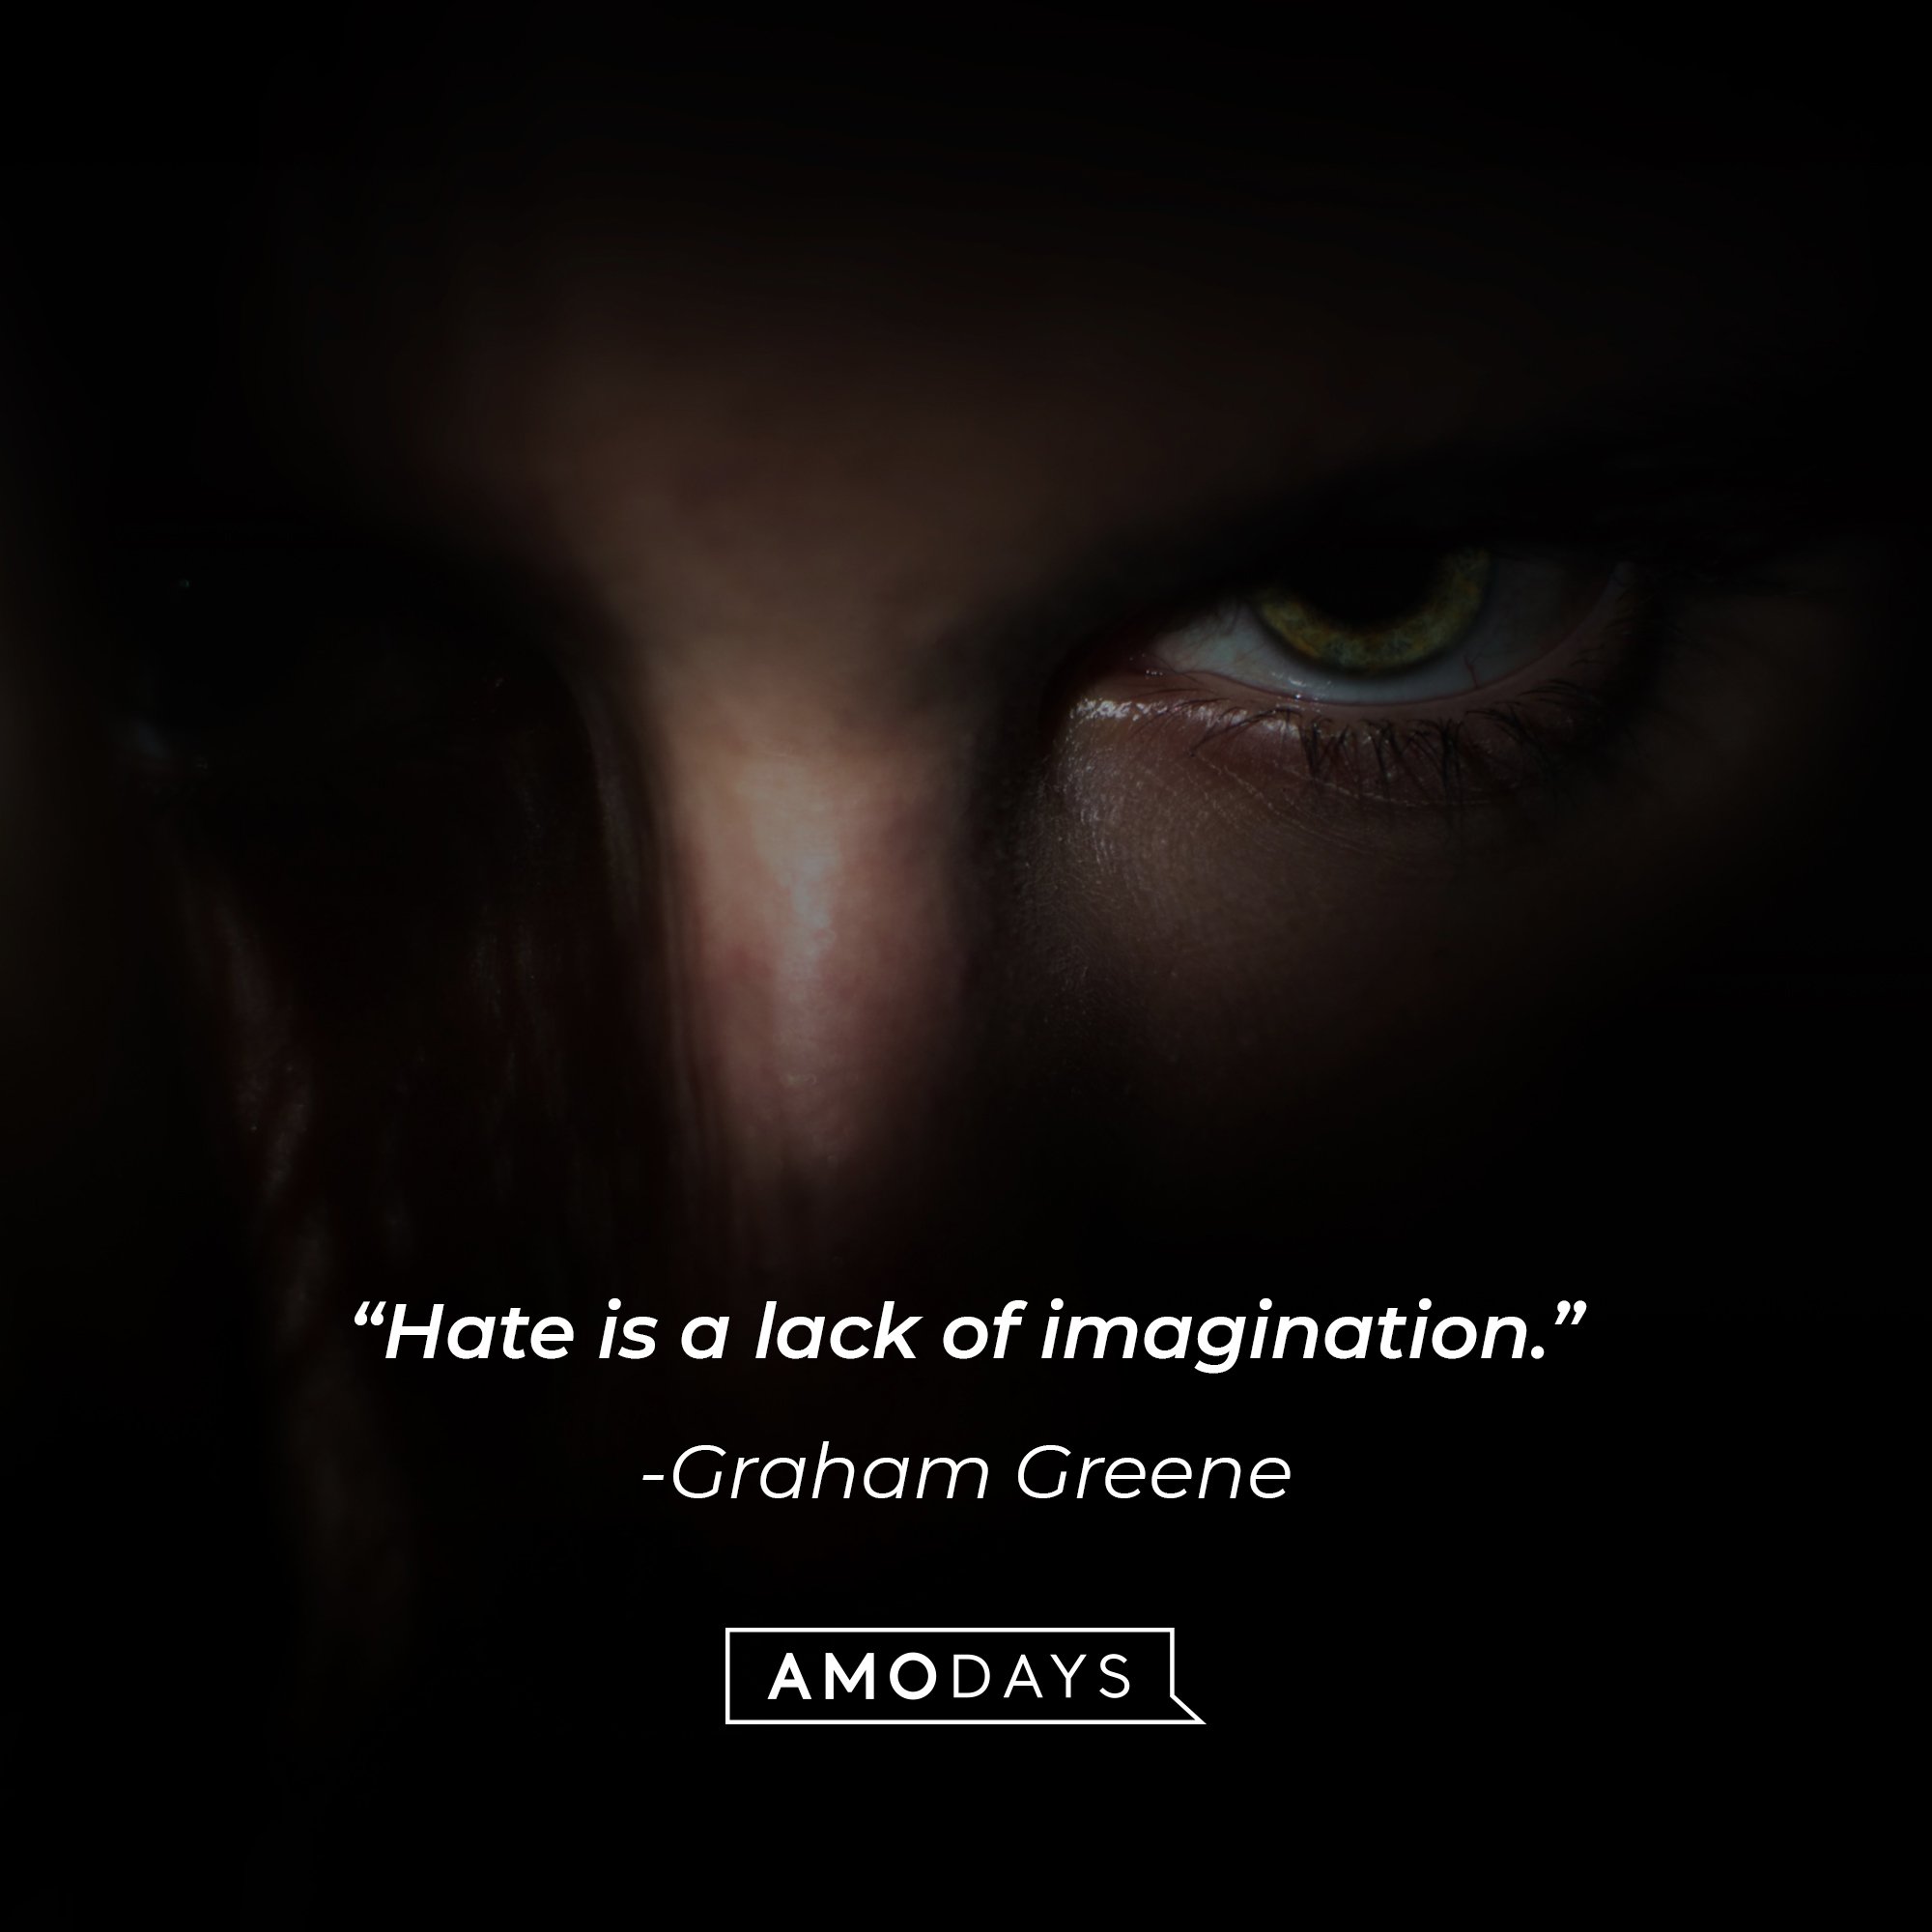 Graham Greene’s quote: “Hate is a lack of imagination.” | Image: Amodays  